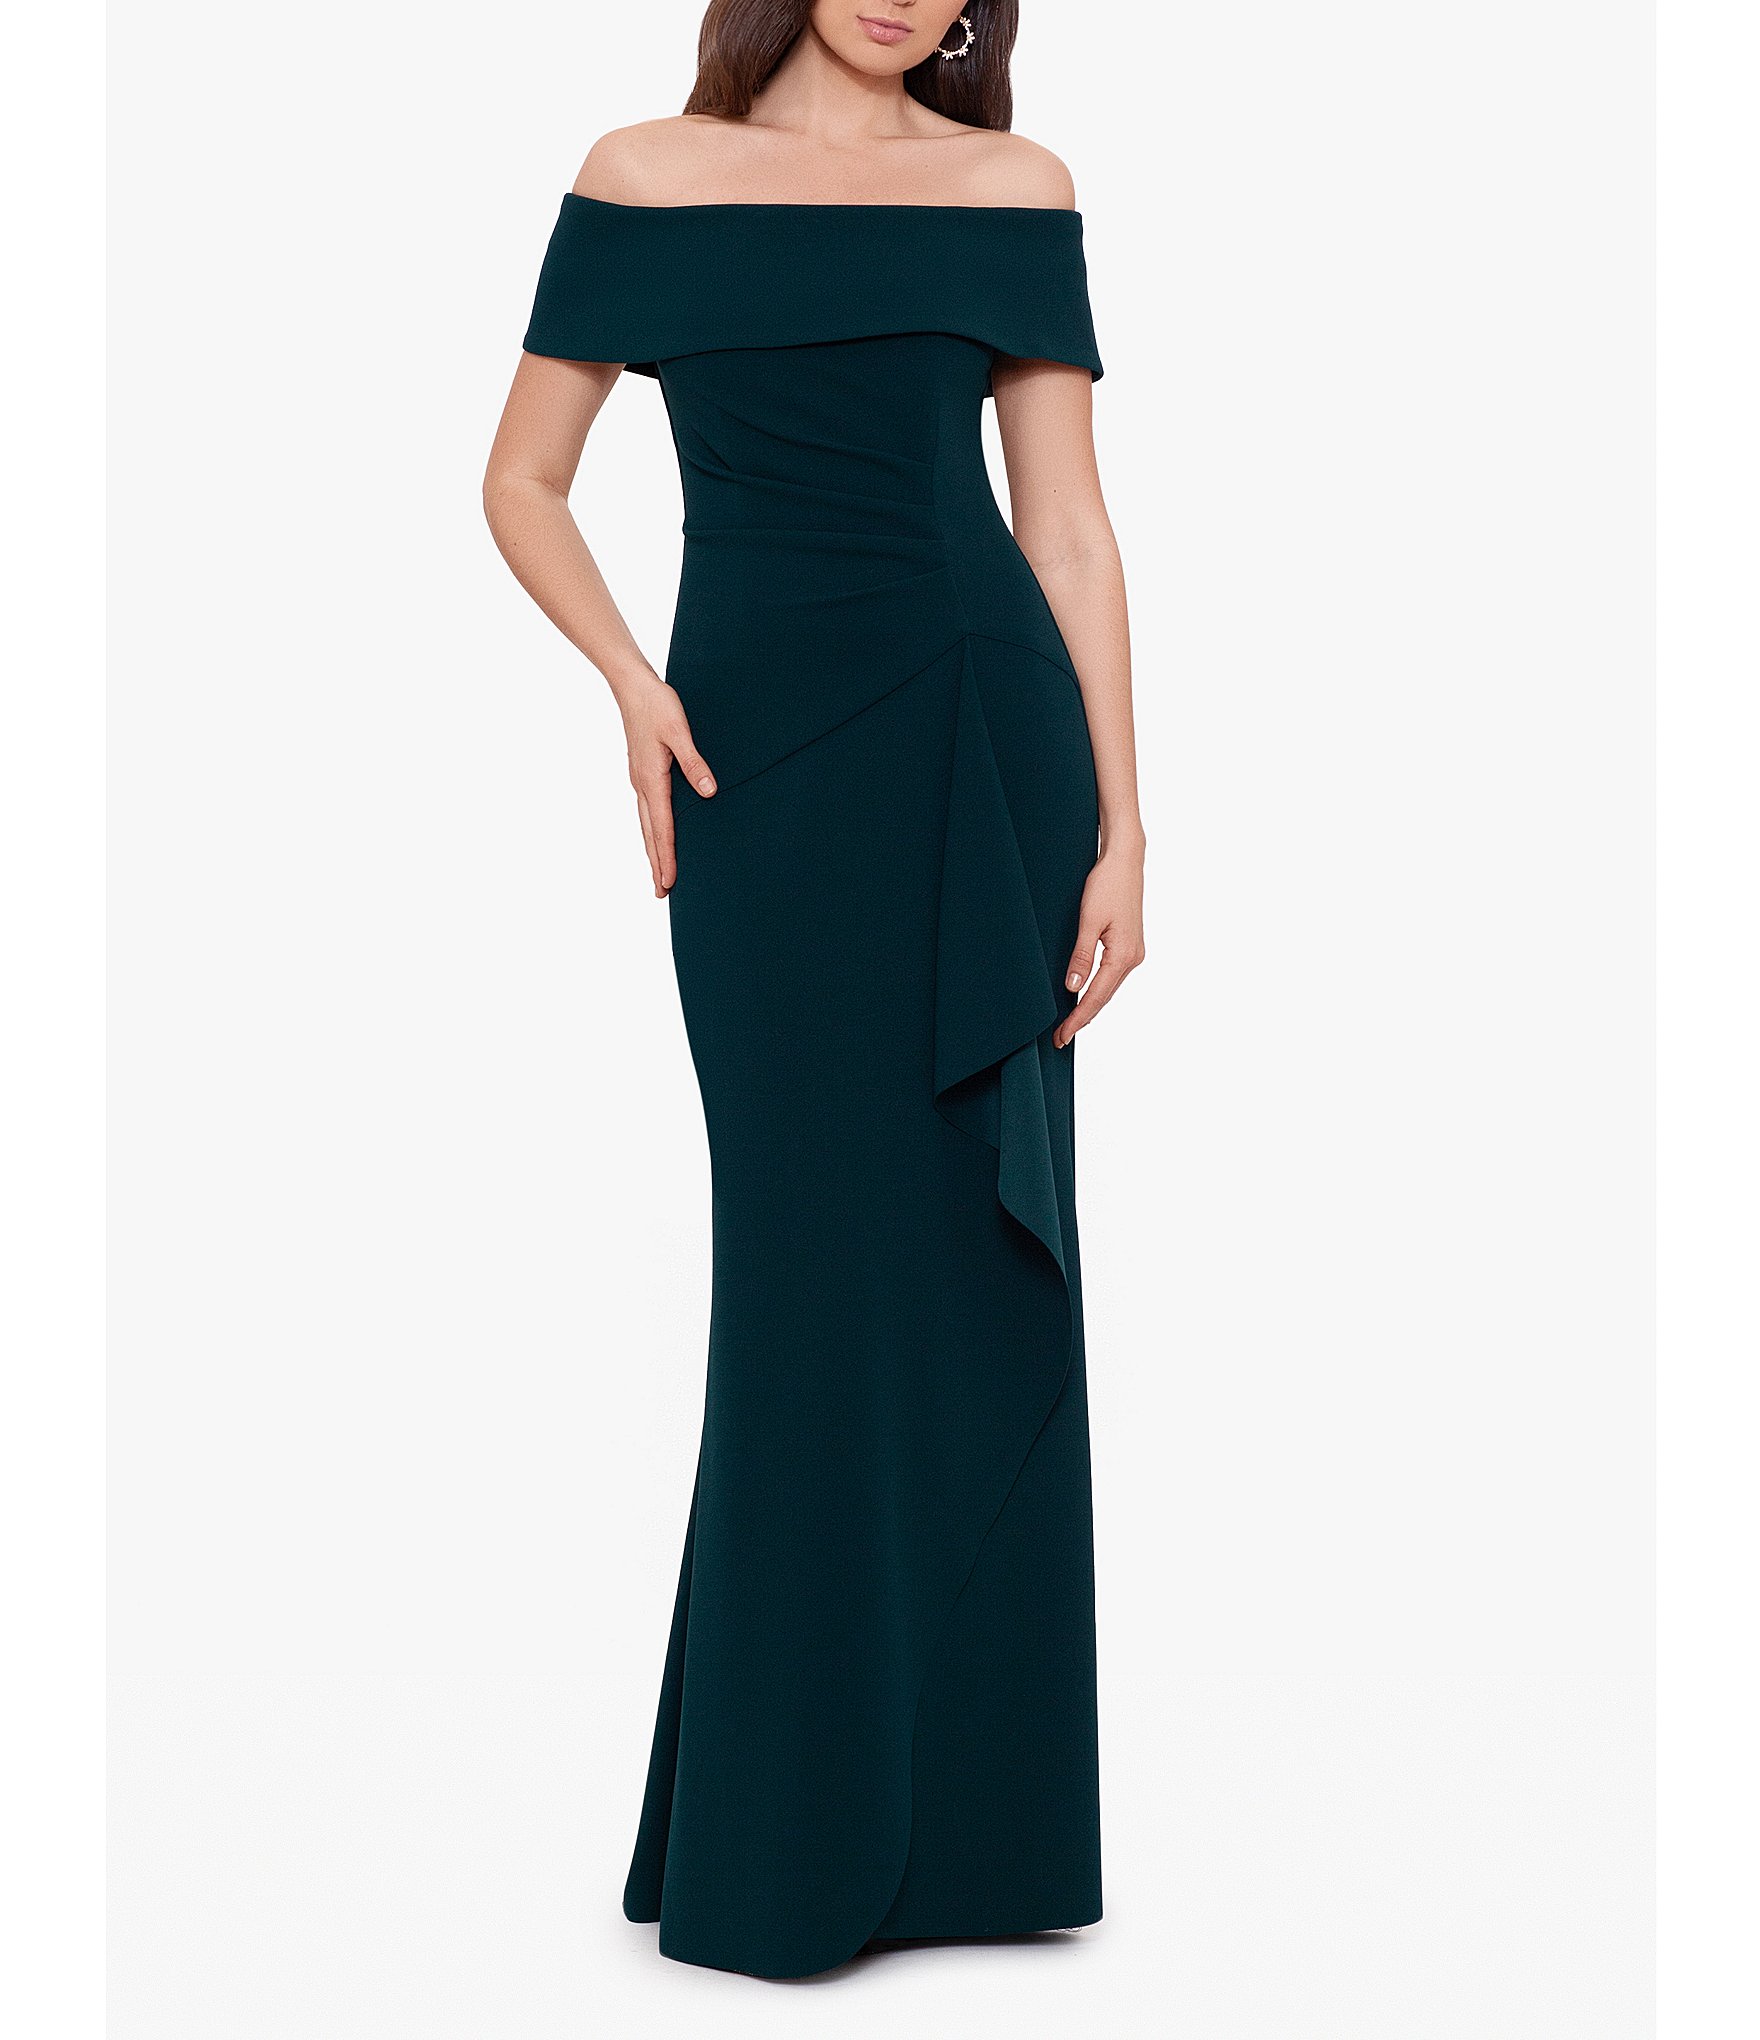 Xscape Stretch Off-the-Shoulder Short Sleeve Gown | Dillard's